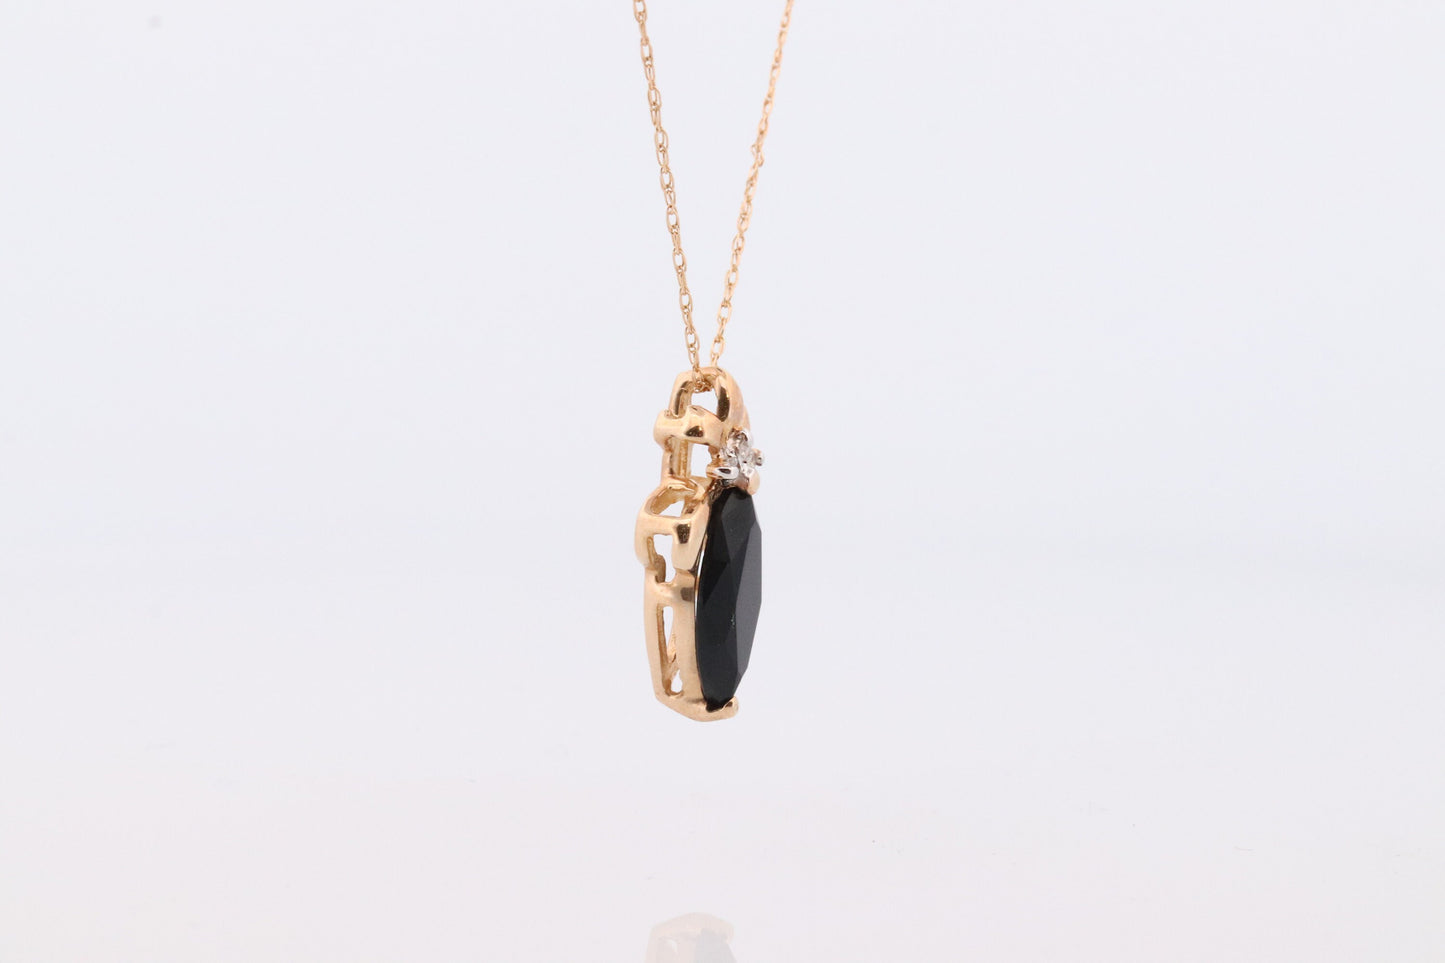 10k Onyx and Diamond Pendant. Marquise faceted Onyx and Diamond accent Pendant. Thin wheat chain necklace.